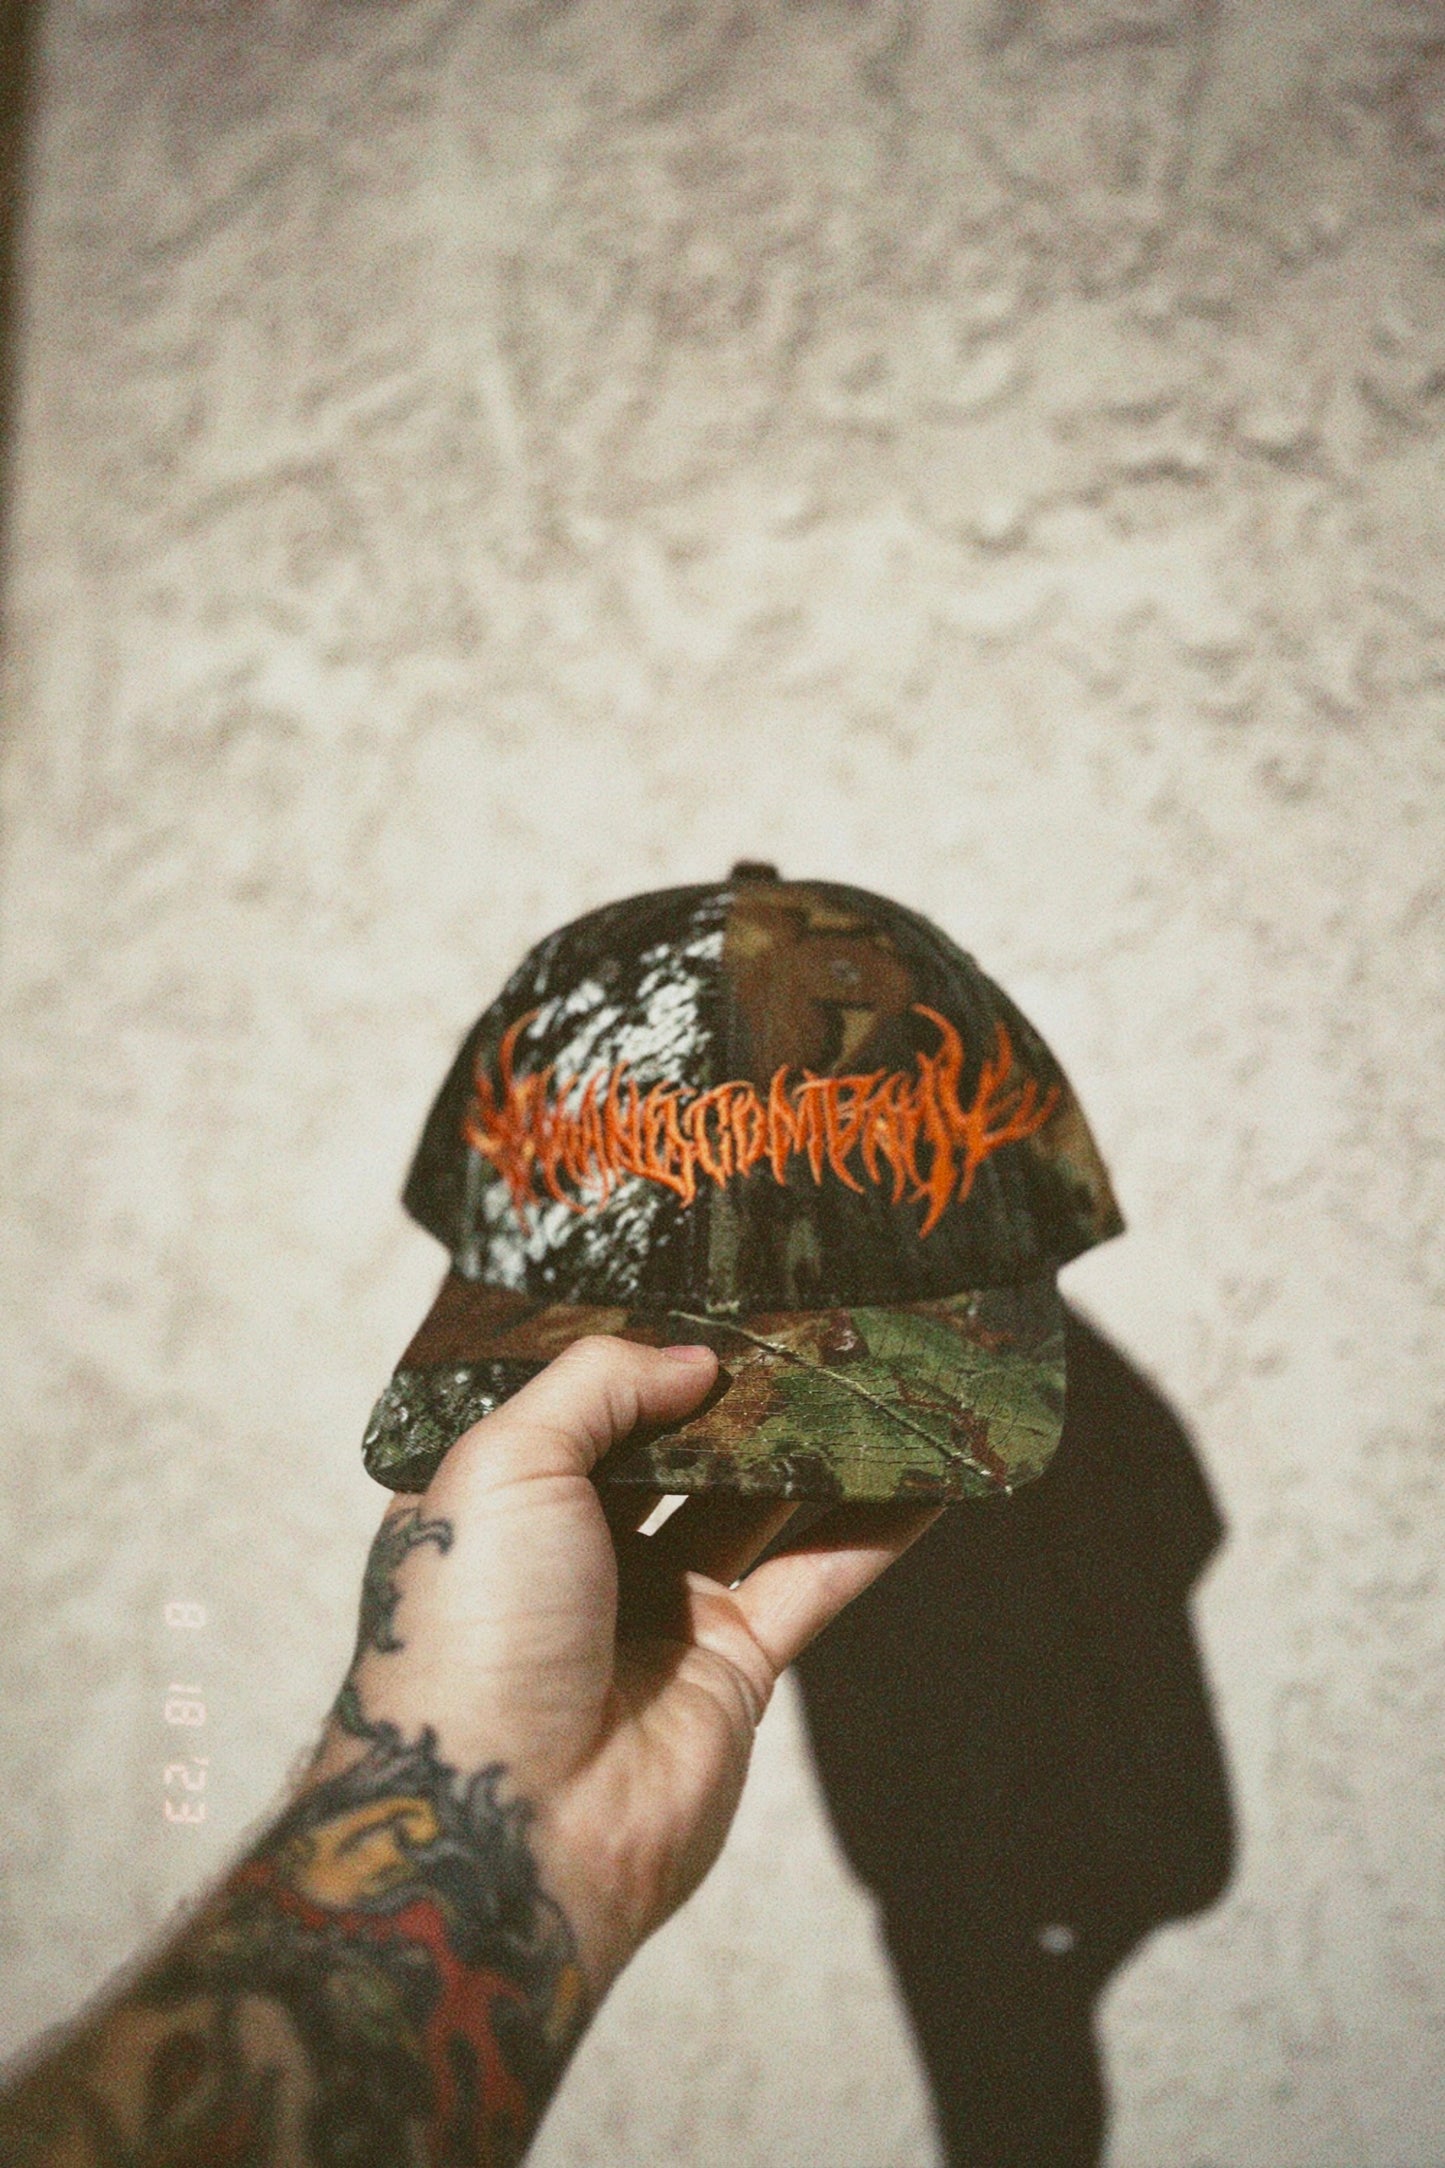 METAL IS FOR SINNERS (SNAP BACK)